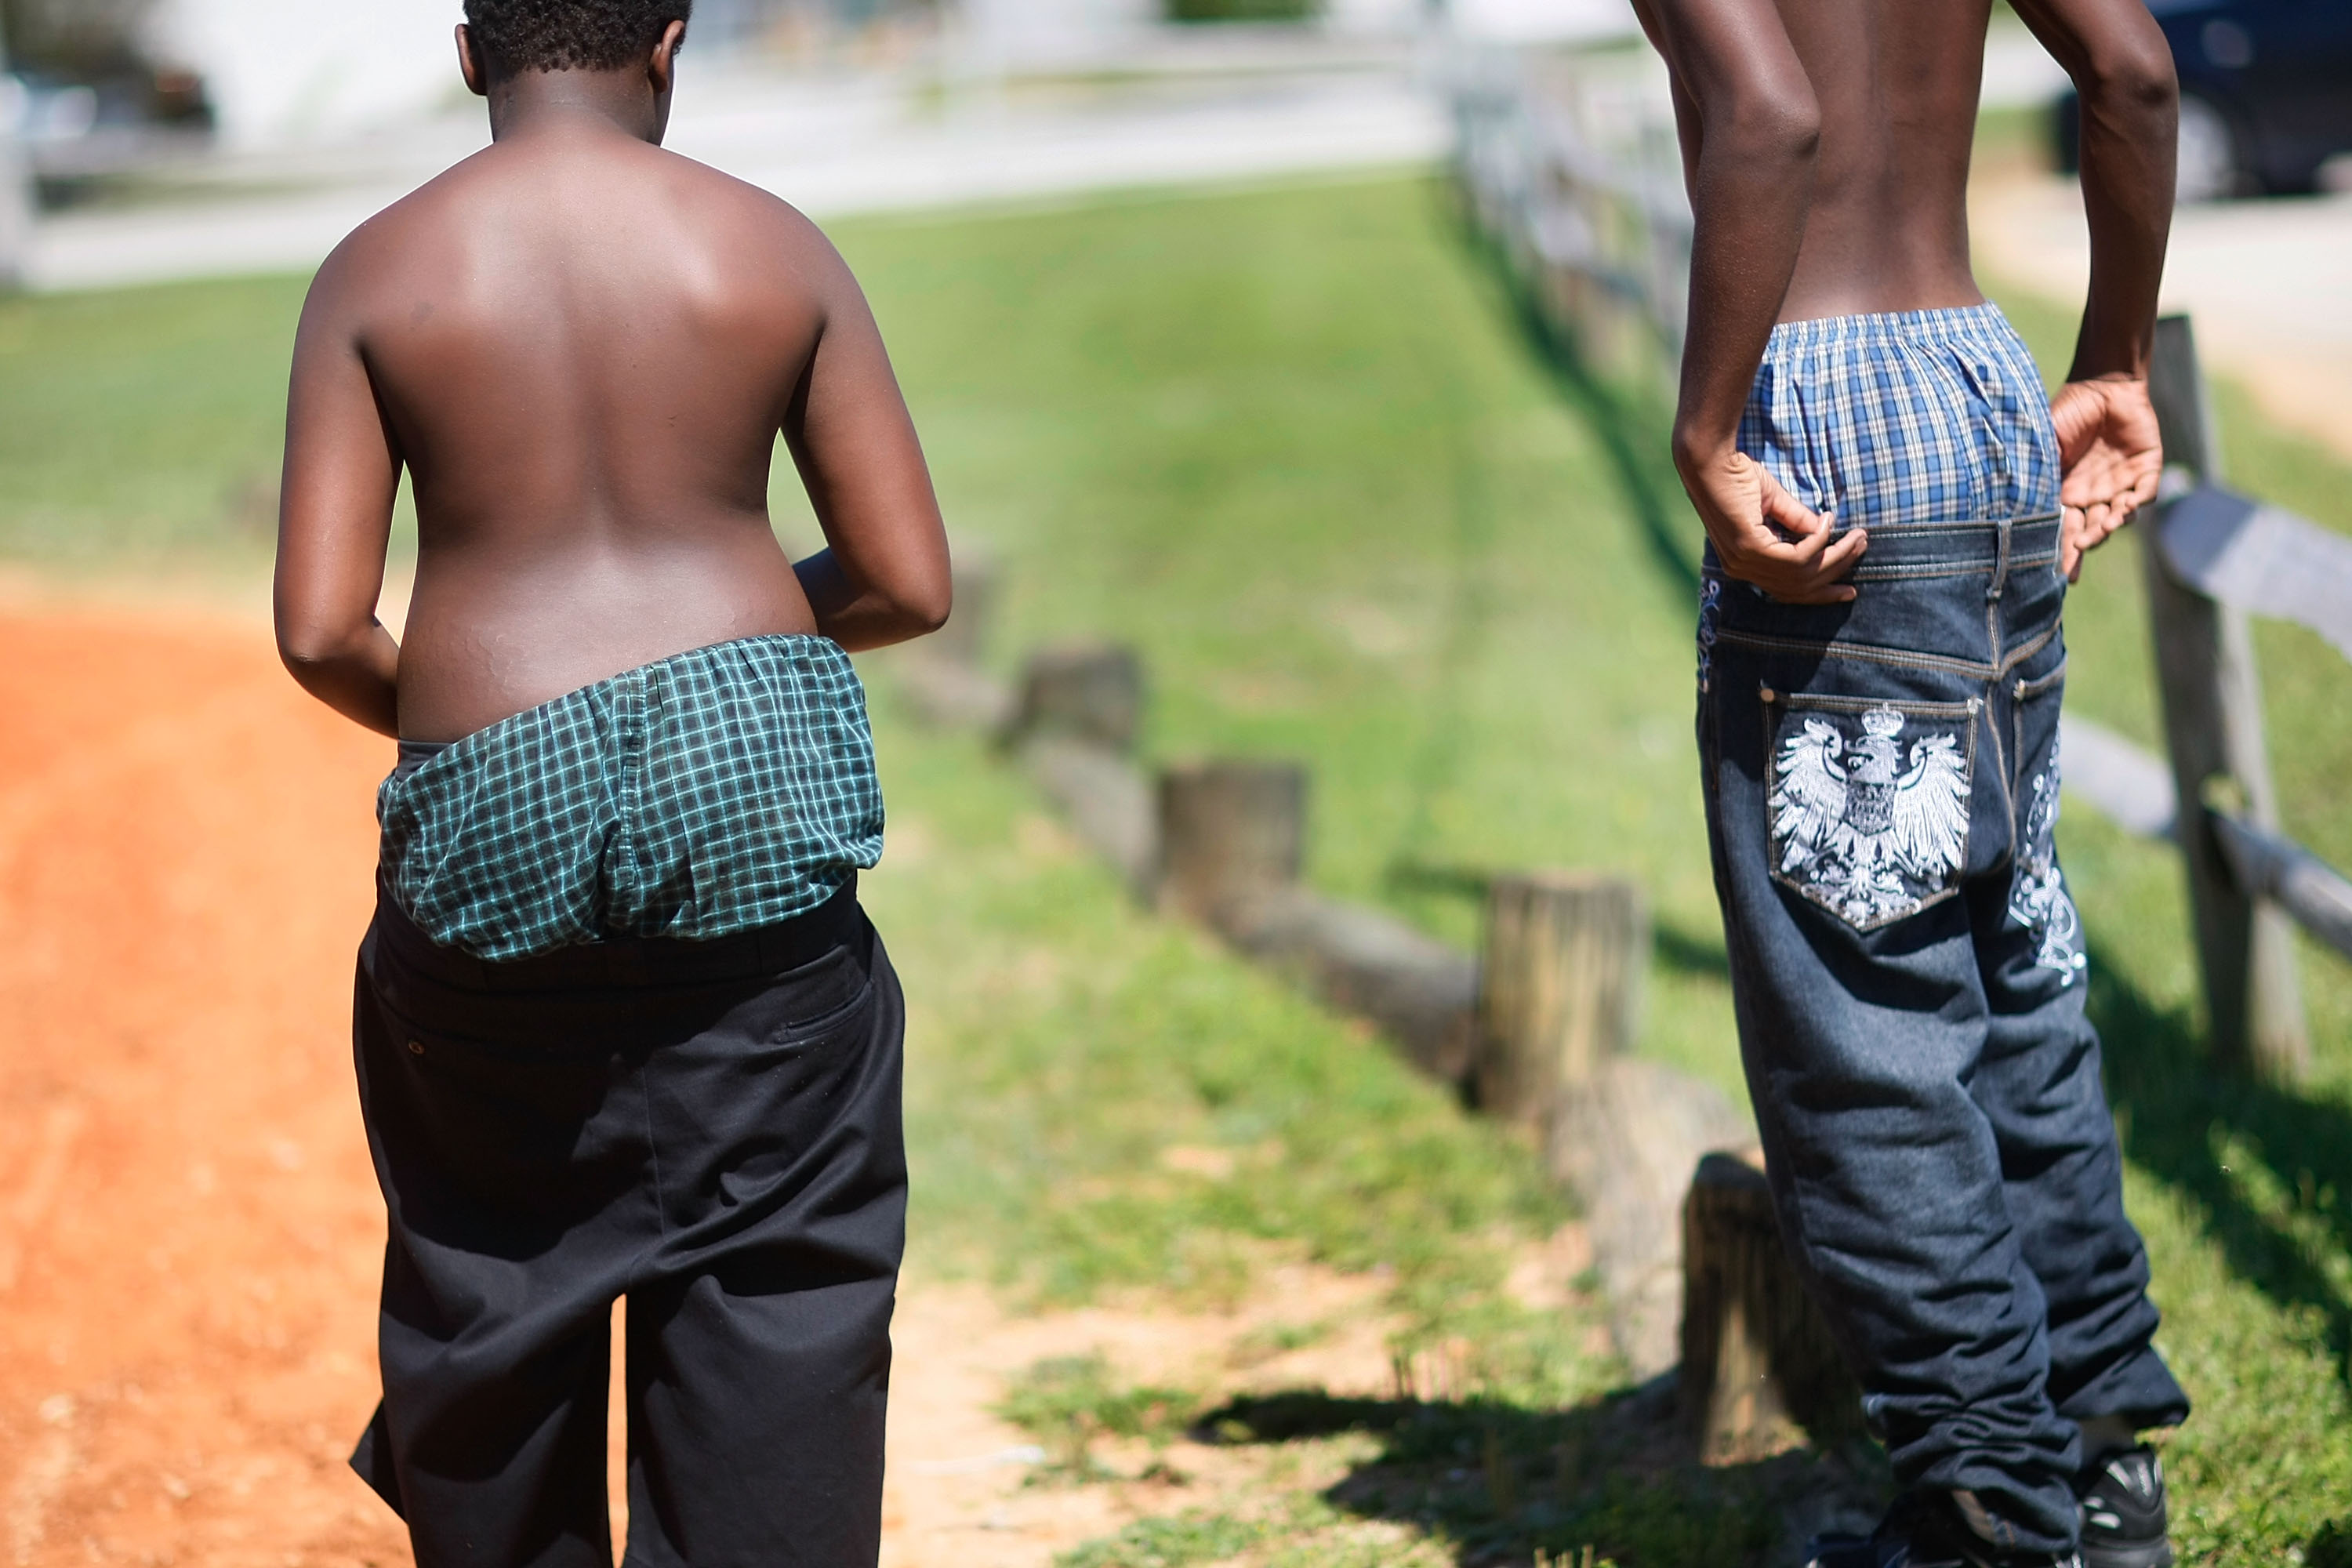 Judge Rules Ban On Saggy Pants Unconstitutional